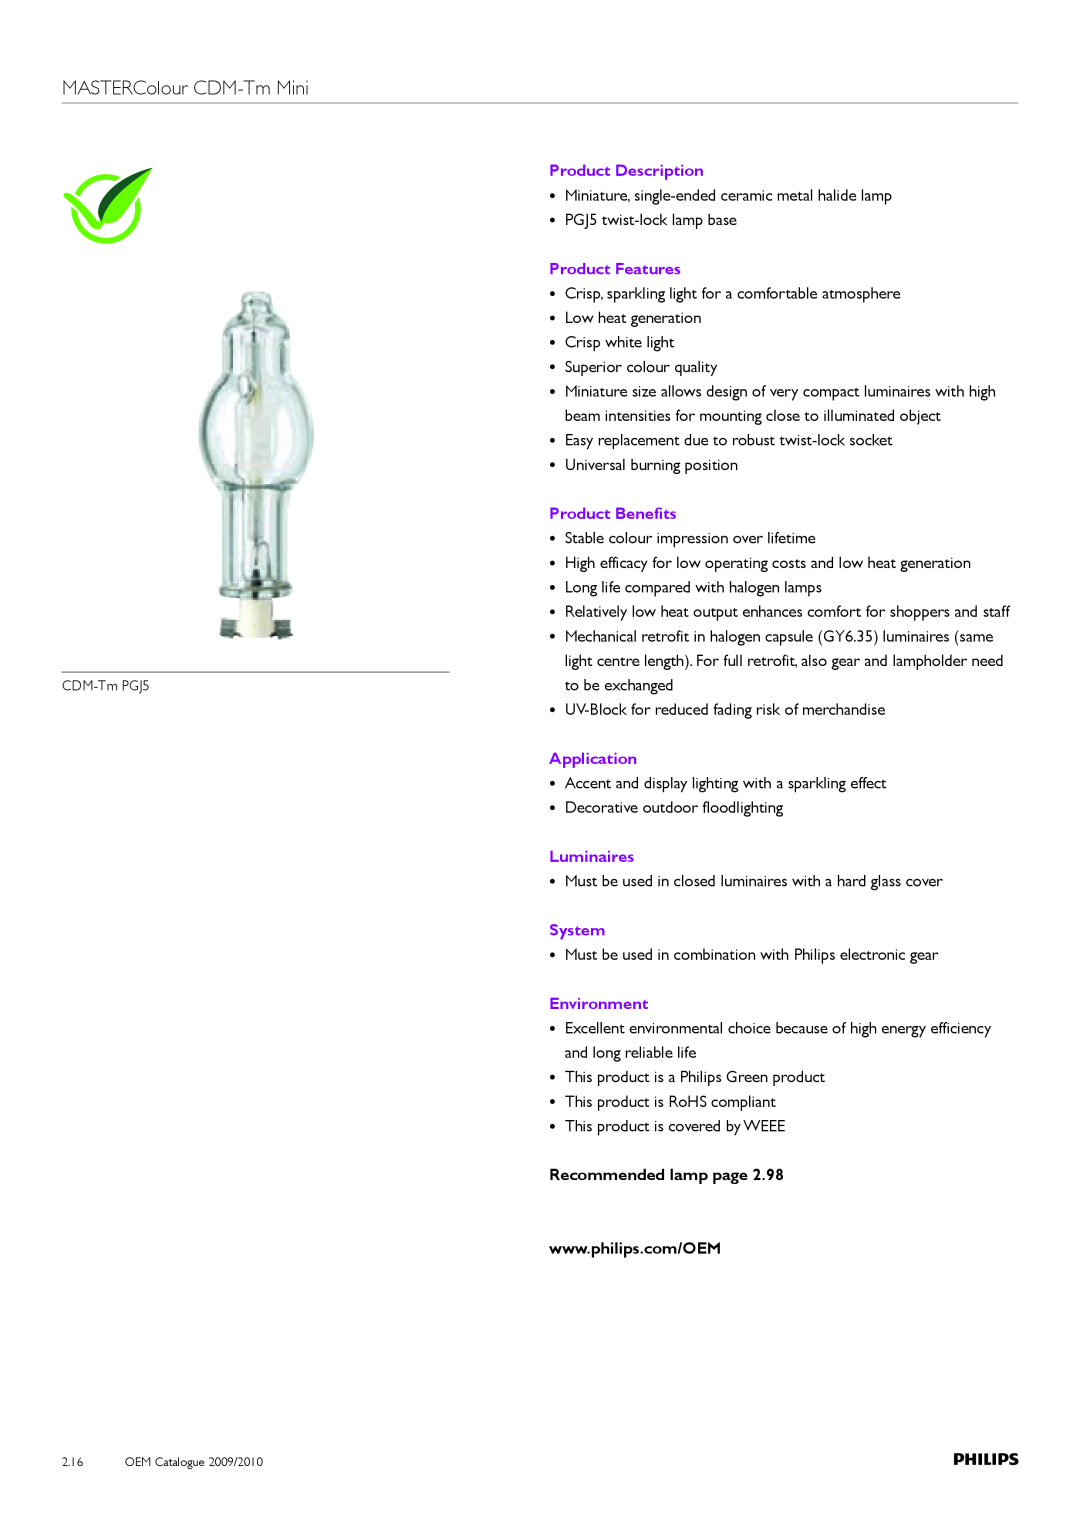 Philips Compact HID Lamp and Gear MASTERColour CDM-TmMini, Product Description, Product Features, Product Benefits, System 